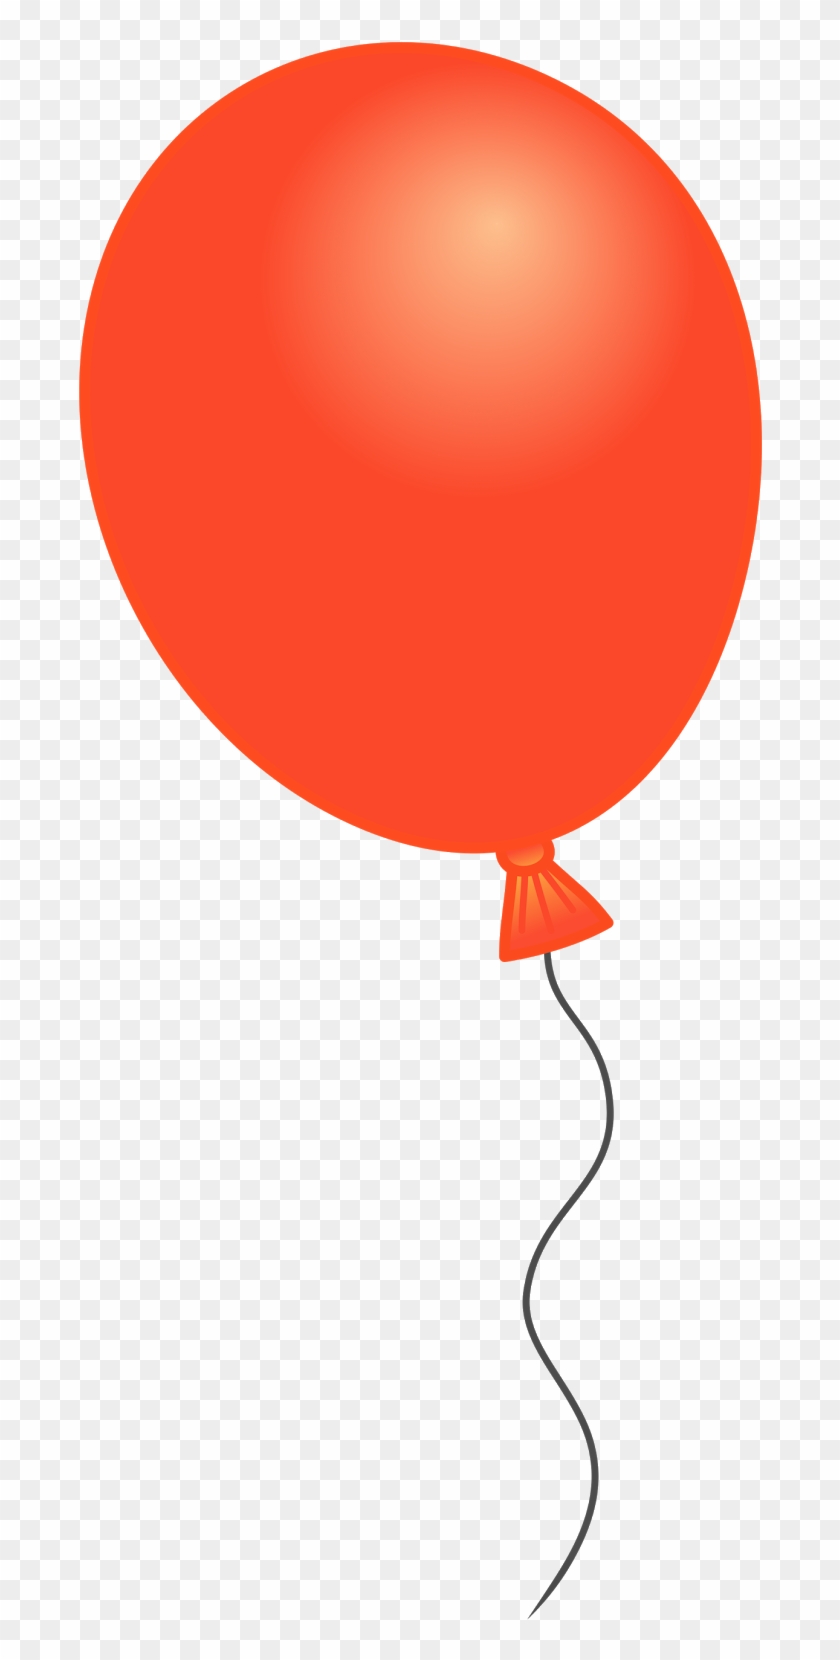 Download Svg Library Orange Balloon Cliparts Download Clip Art Single Balloon Transparent Hd Png Download 718x1600 2503709 Pngfind